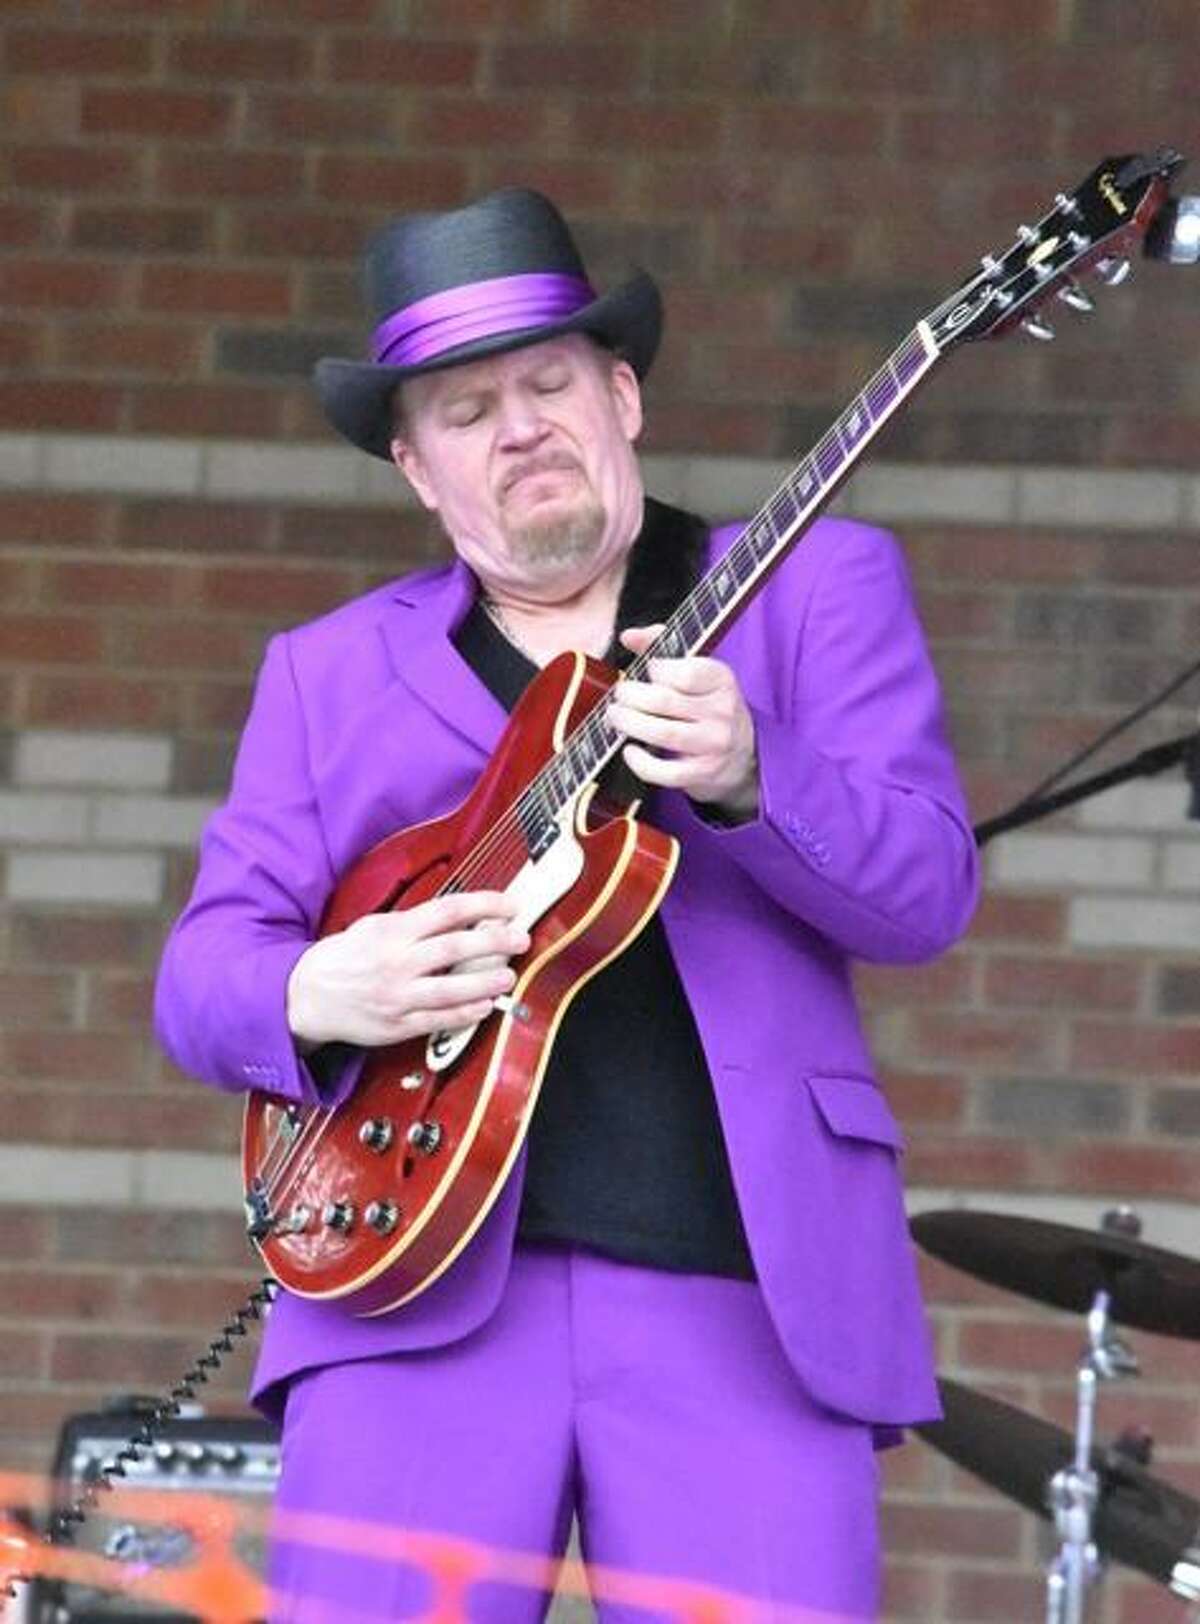 Danny Draher will liven up St. Patrick's Day at the Maple Tree Cafe.